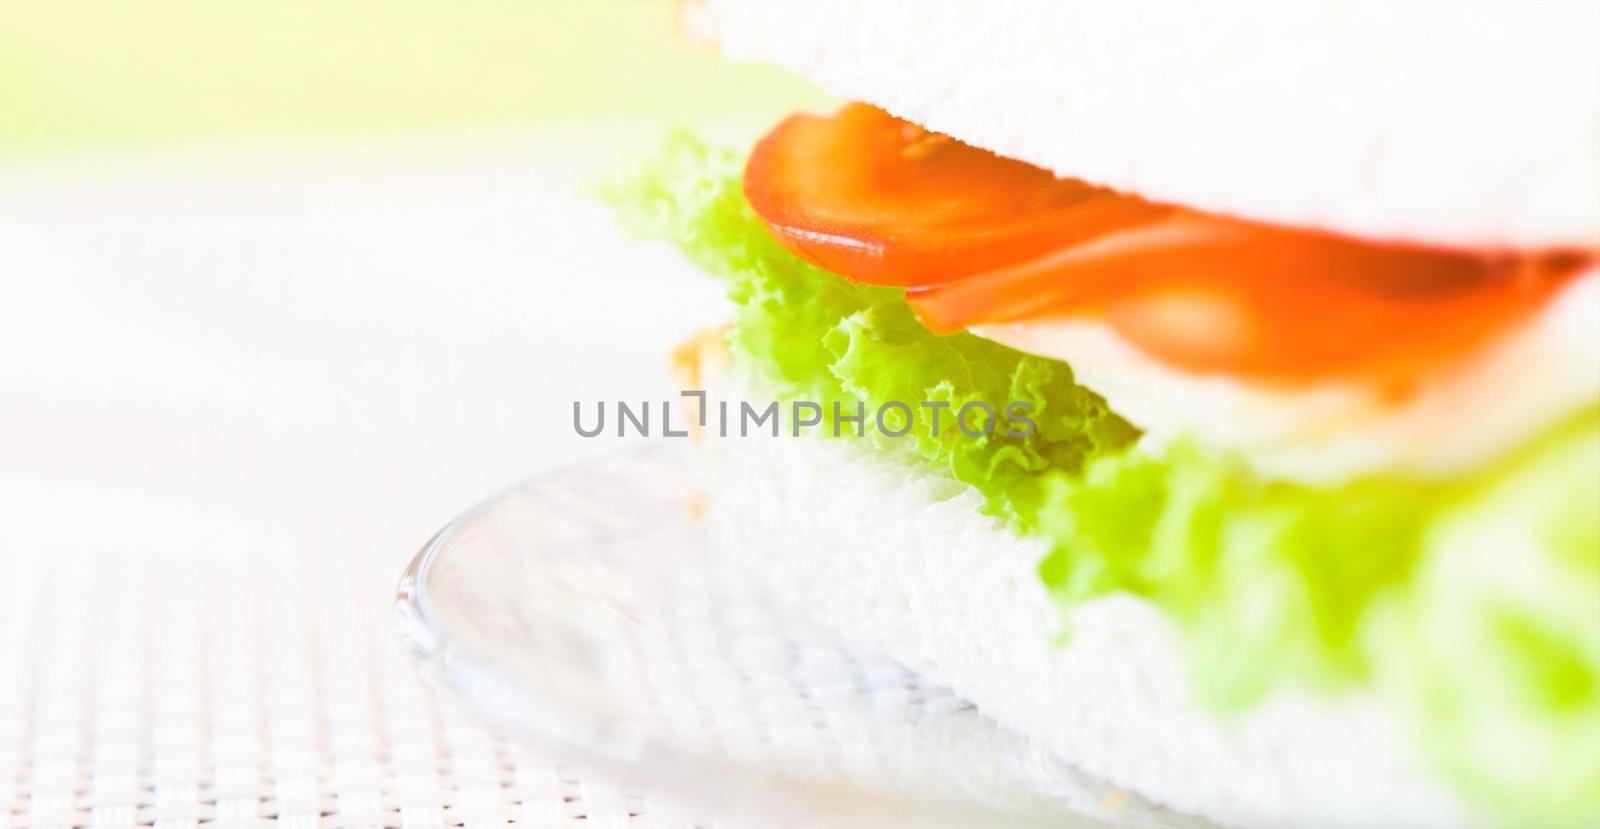 Vegetarian low carb sandwich - healthy diet, homemade and eating outside concept. Enjoy a well-balanced lunch